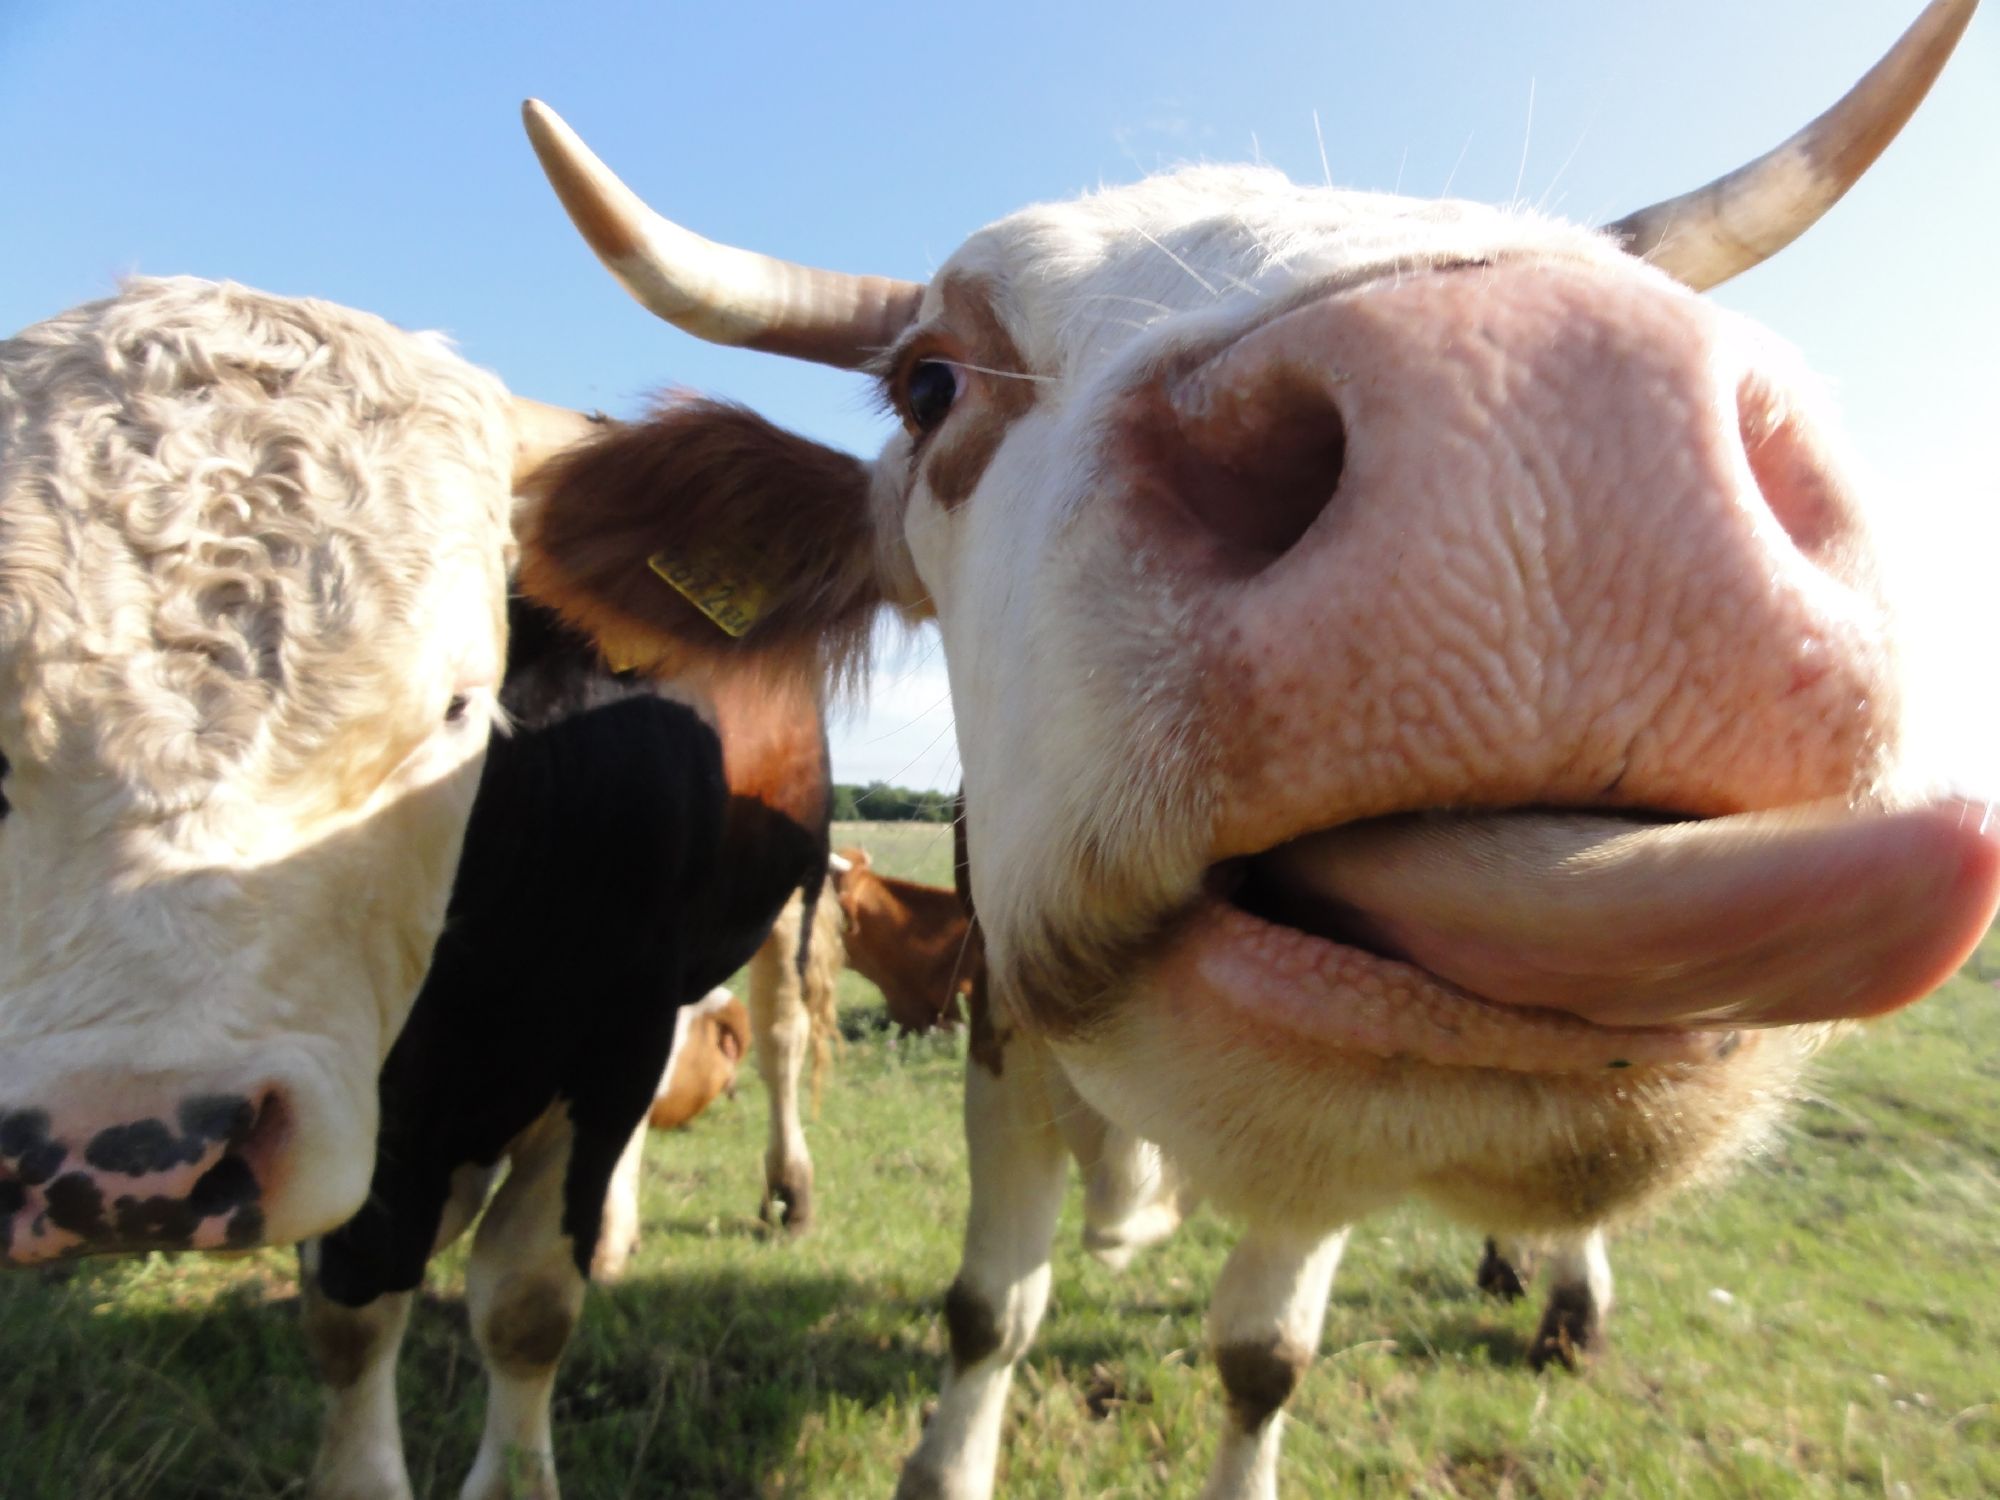 10 amazing facts about cows